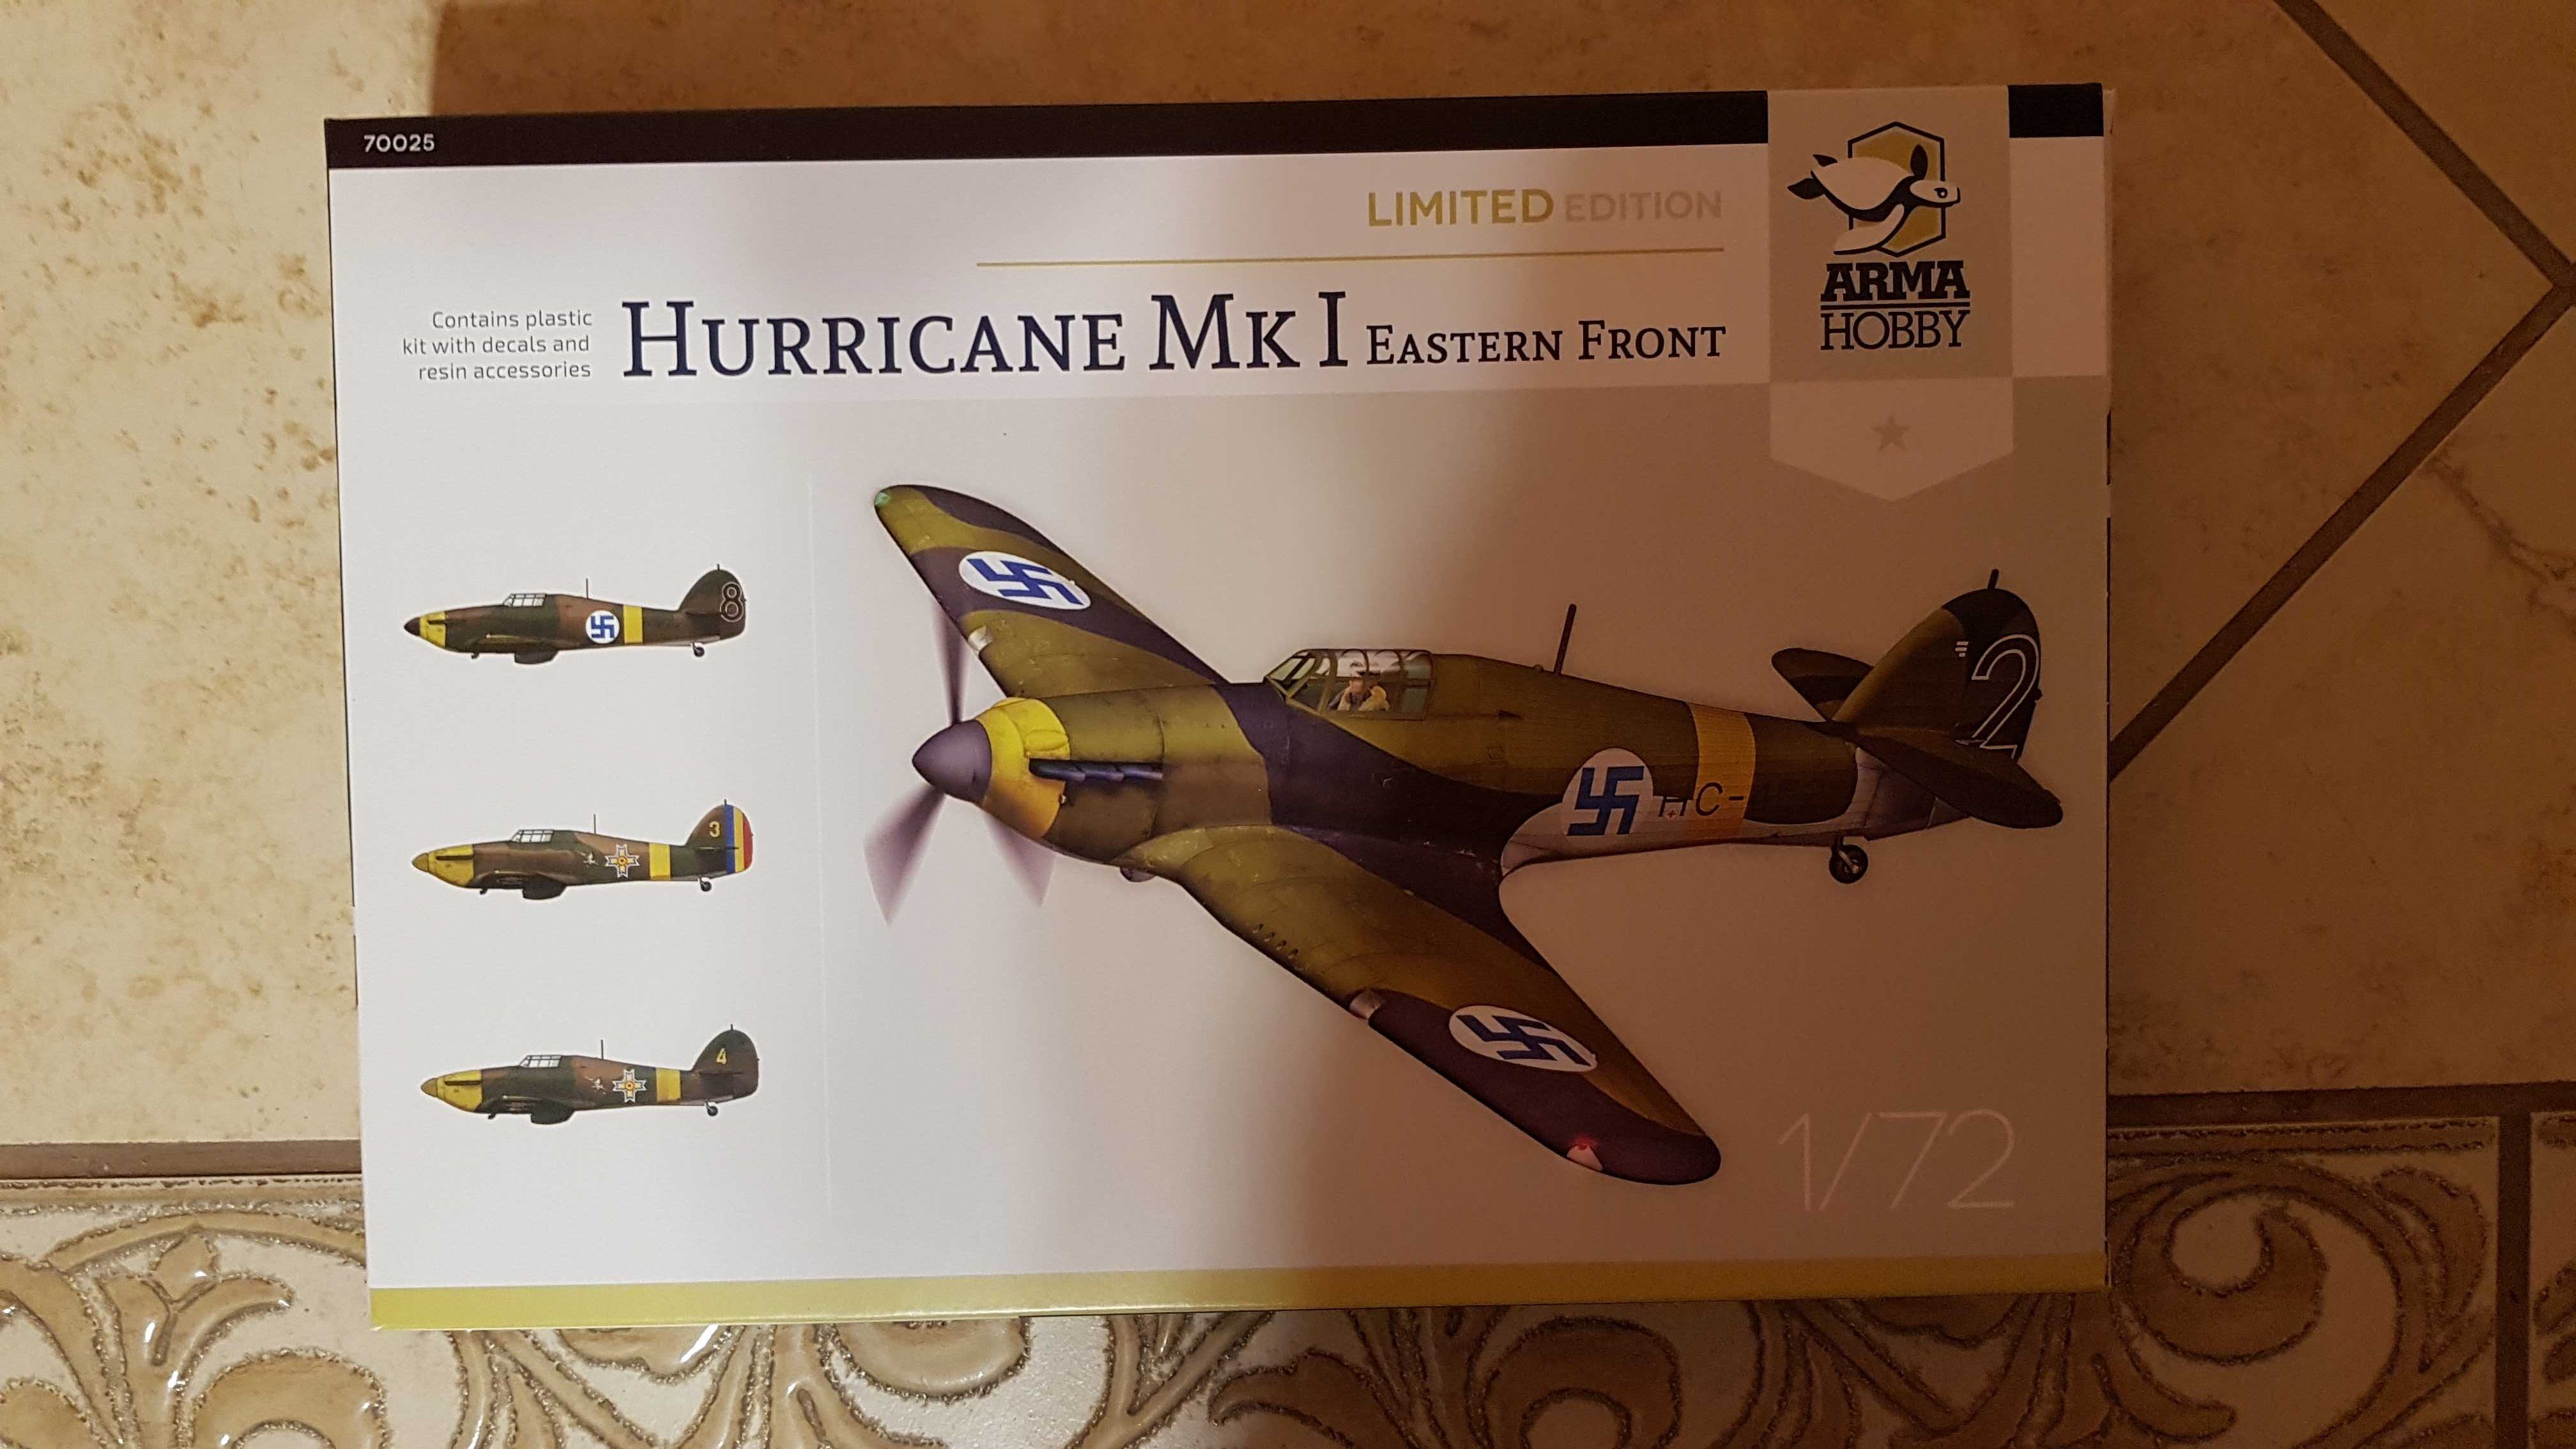 Hurricane MkI Eastern Front, Arma Hobby, 1:72, Limited edition